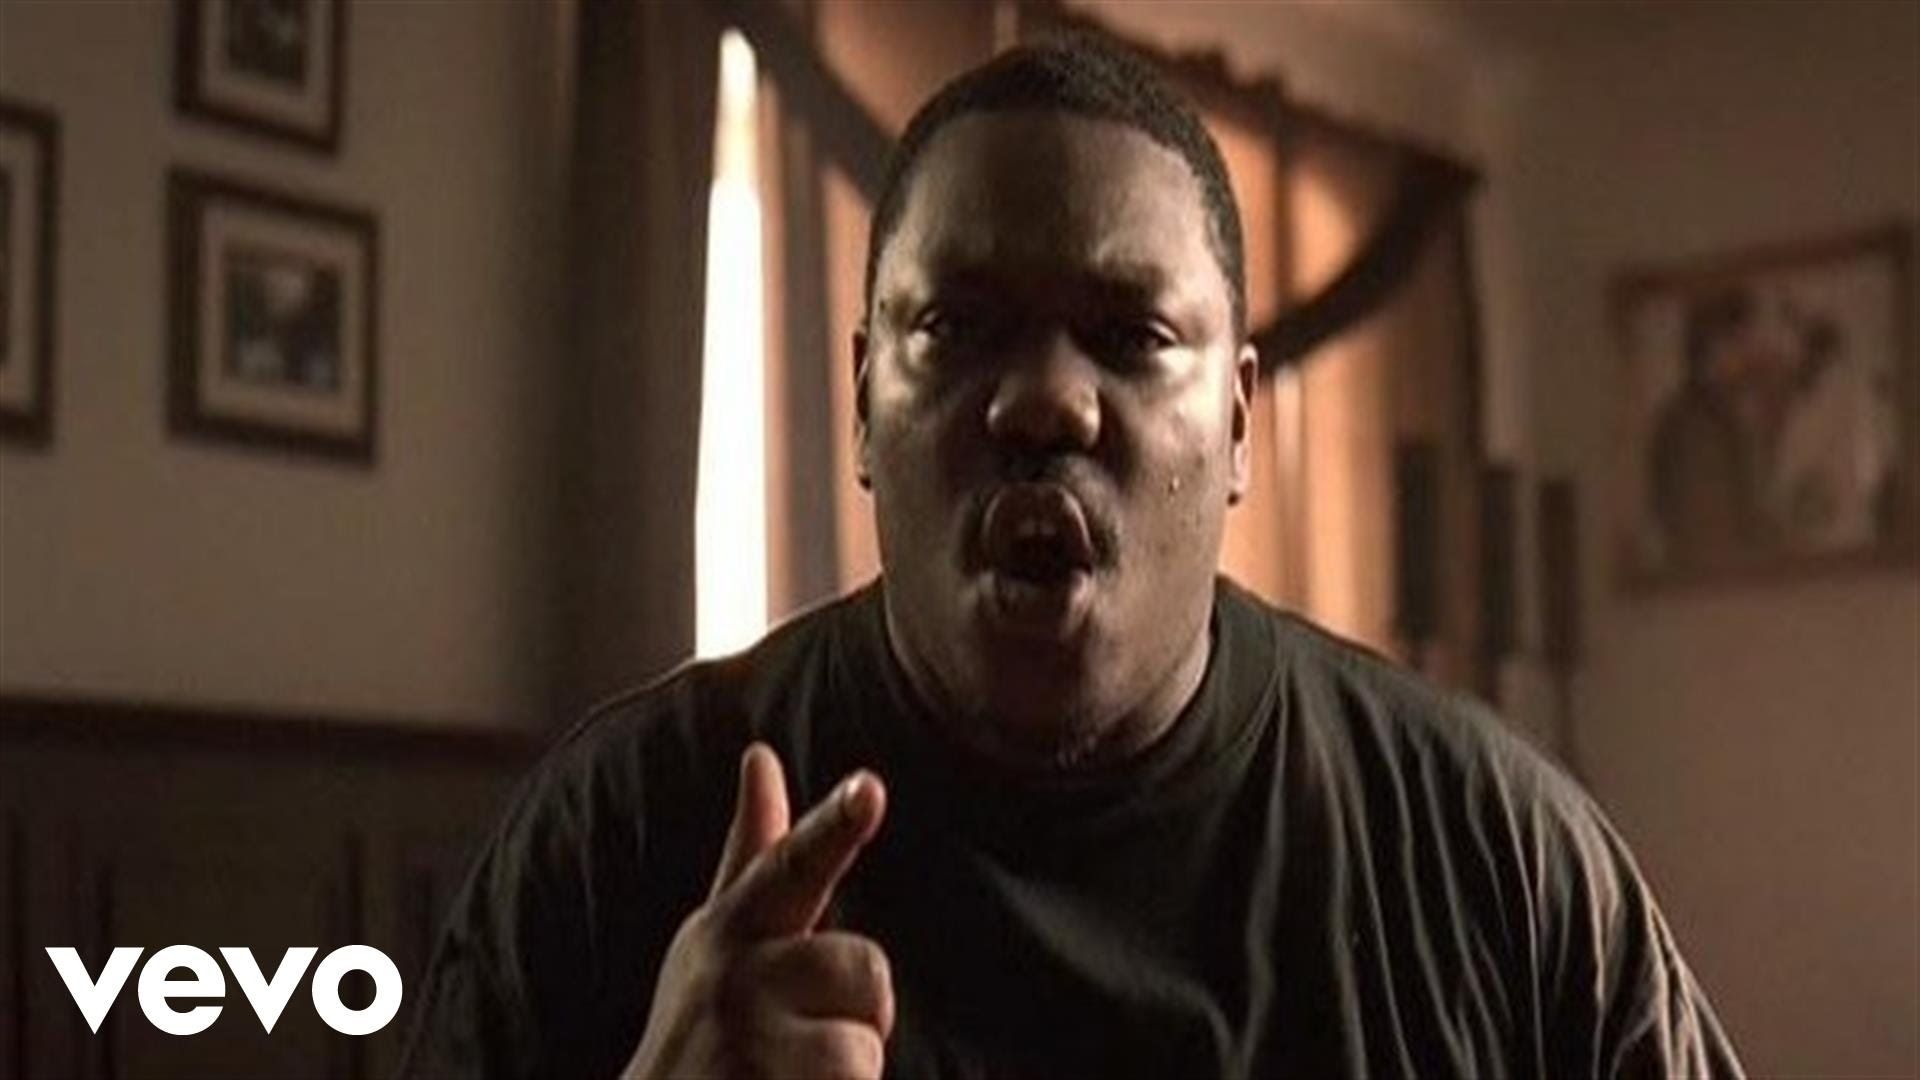 Beanie Sigel Feel It in the Air for Throwback Thursday